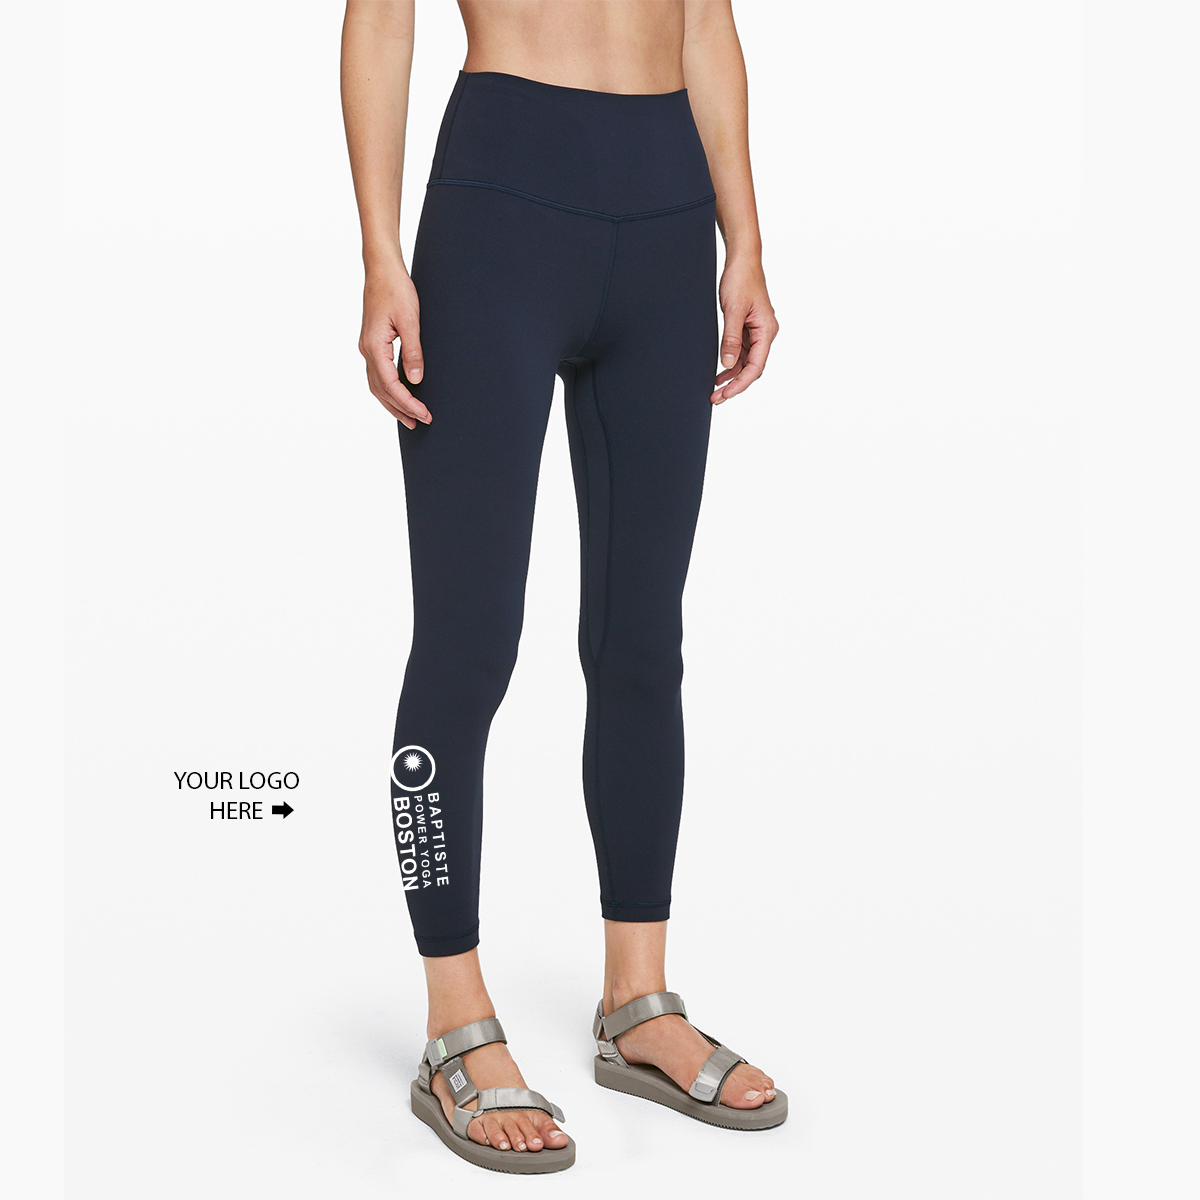 lululemon Long Island - Say it with us: Nu-Lux. Nulux fabric is the latest  to join our family, and we have never been more excited to get naked (or at  least feel